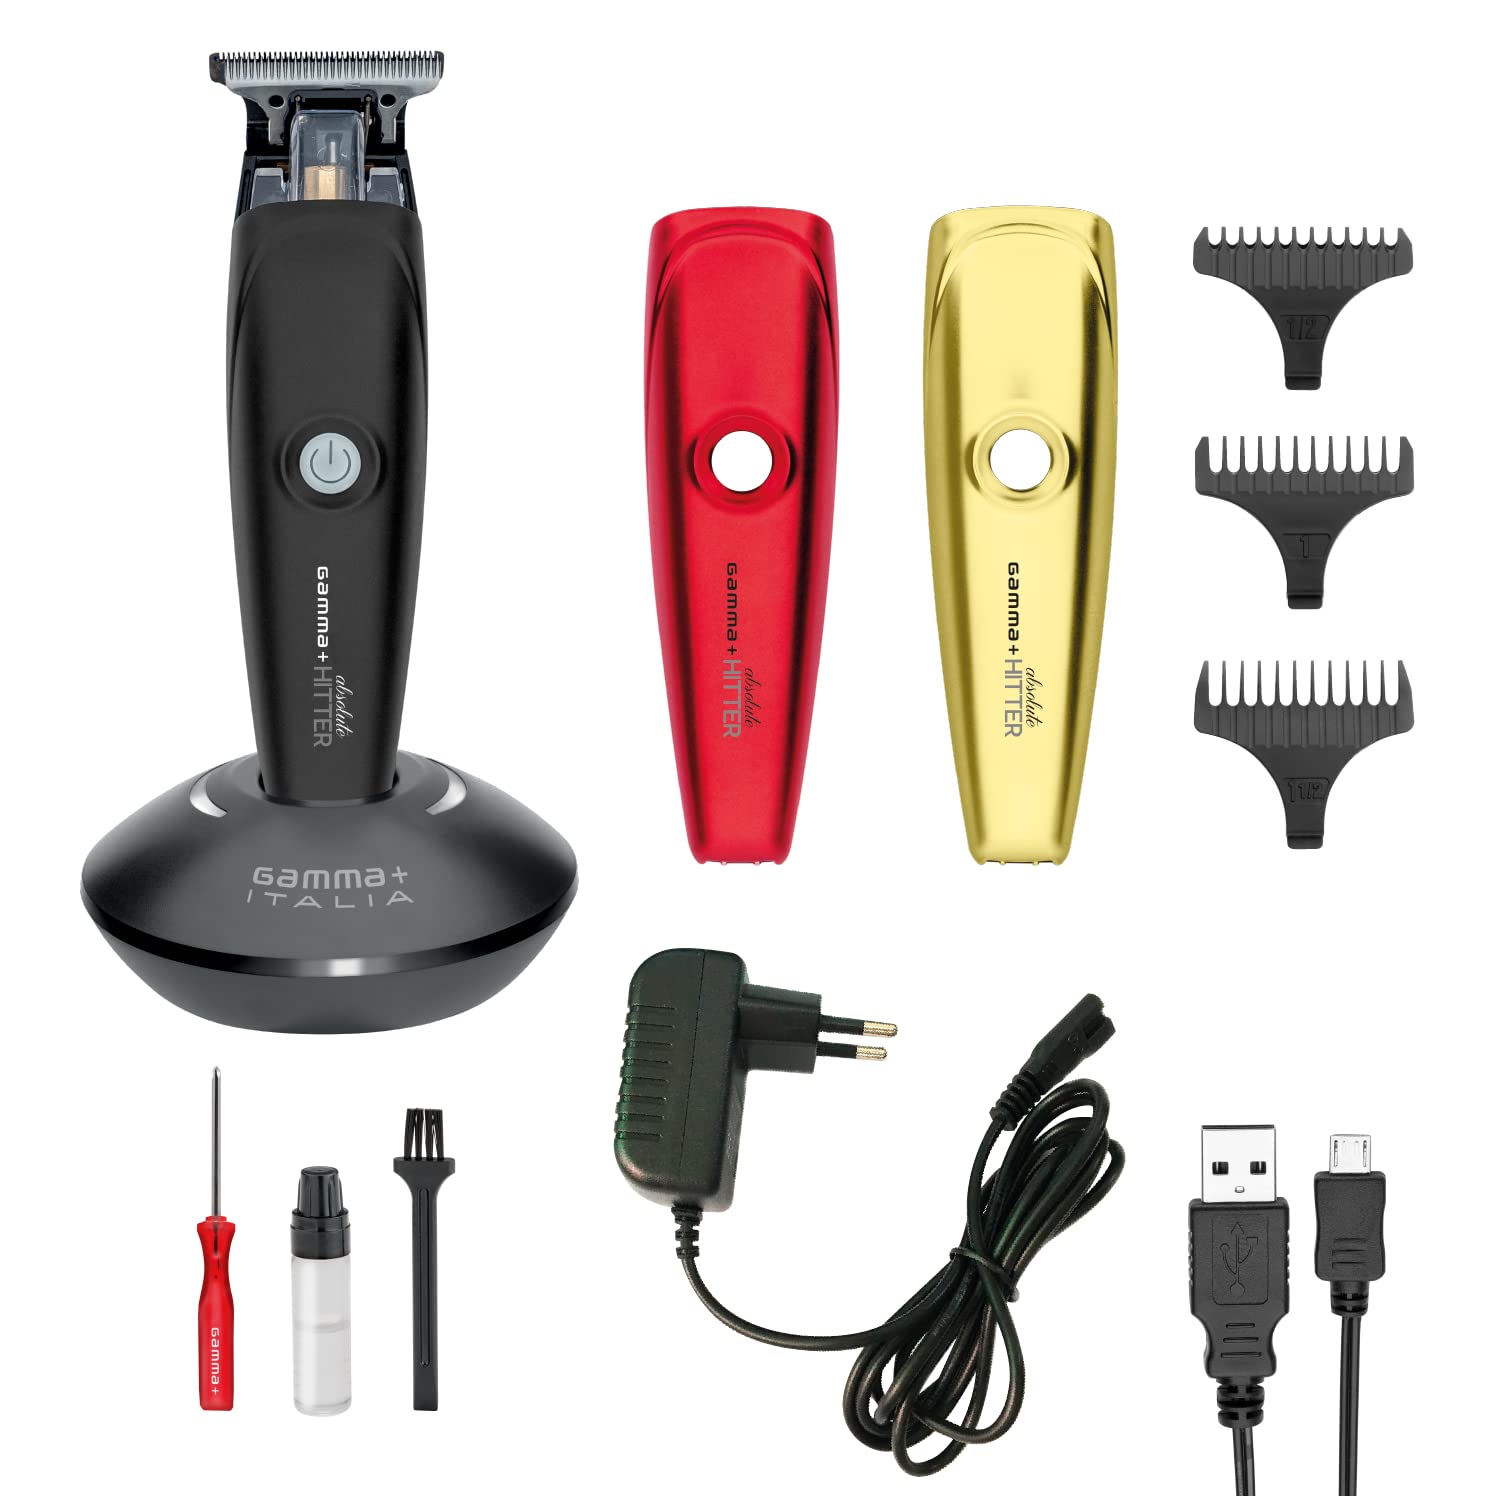 Chấn Viền Gamma+ Absolute Hitter Trimmer Italy